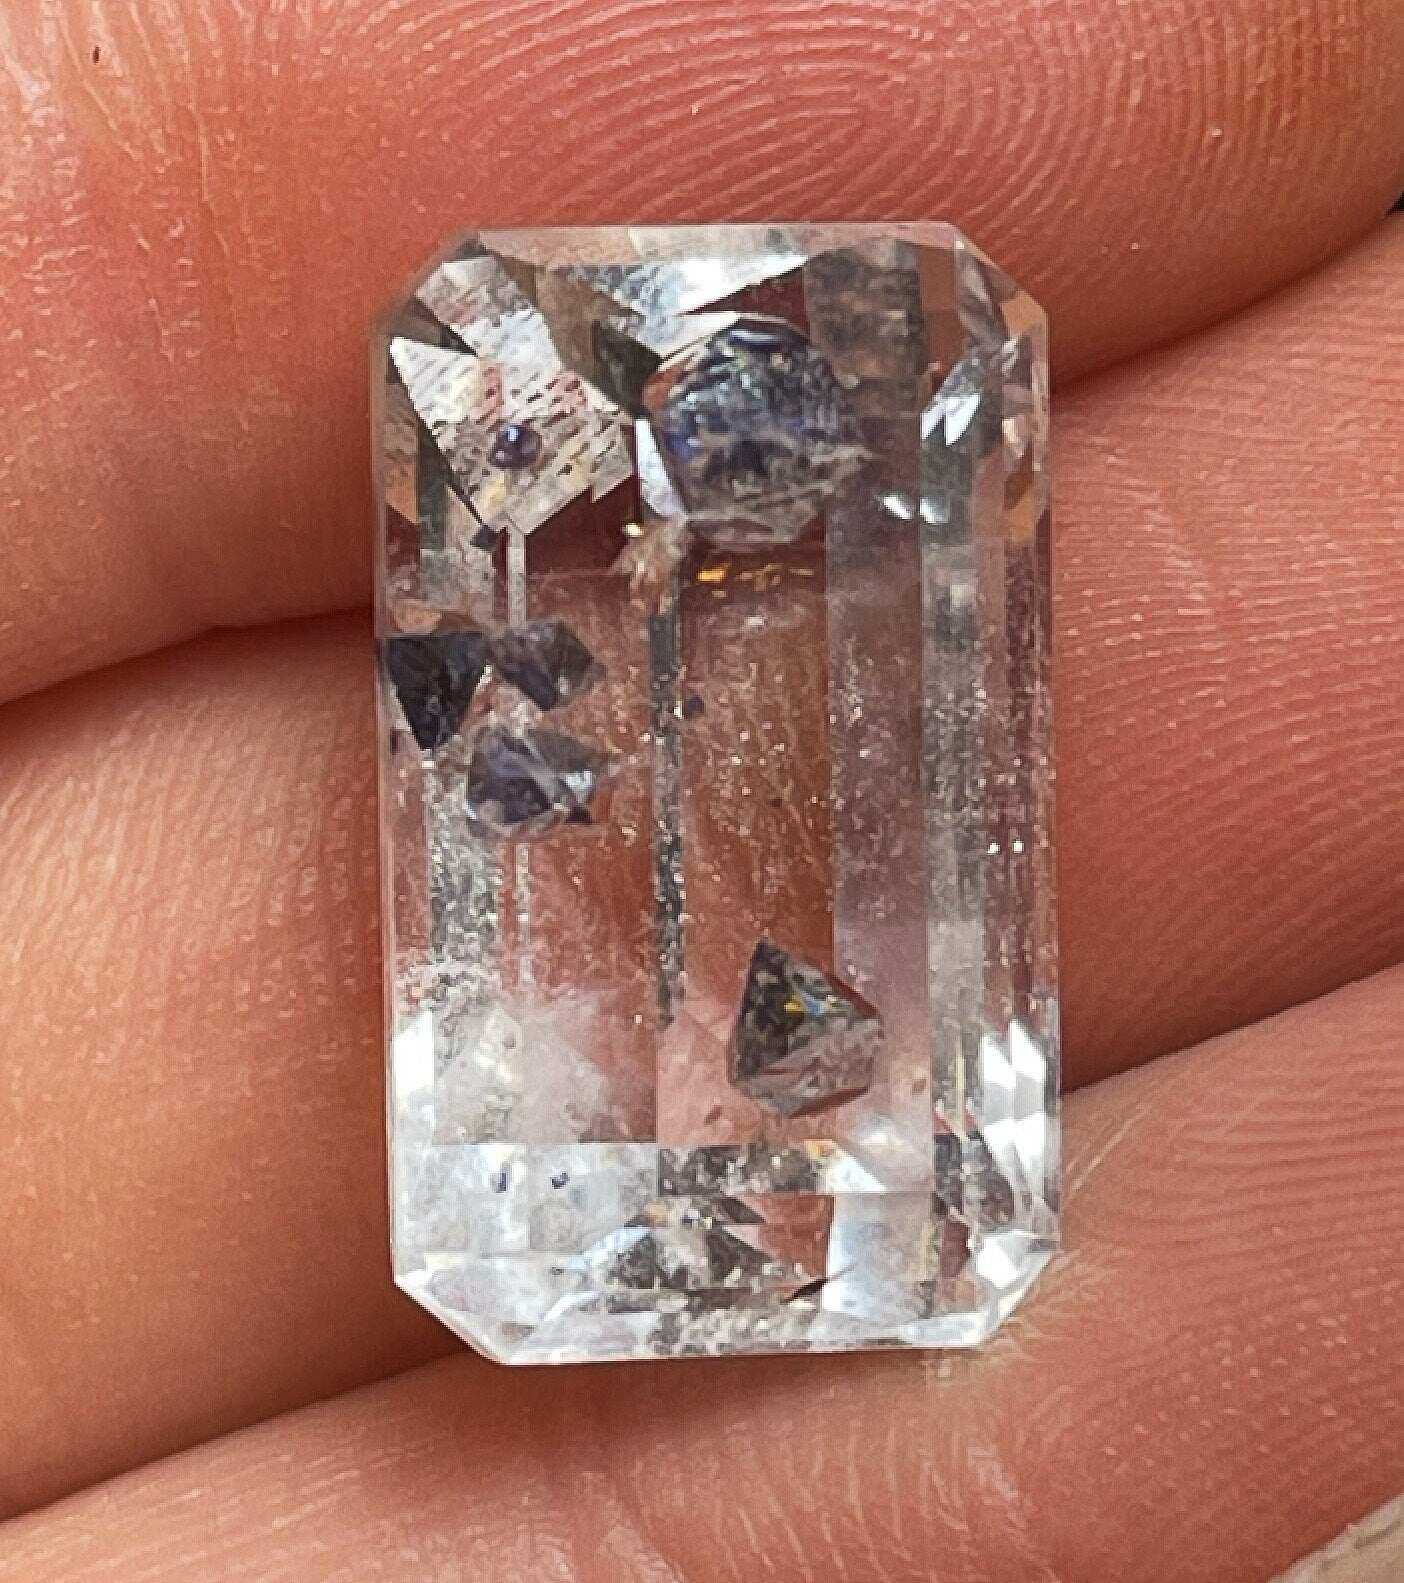 Rare Gem Cut Fluorite In Quartz From A One Off Pocket In Madagascar 2004-  Collectors Piece, Jewellery